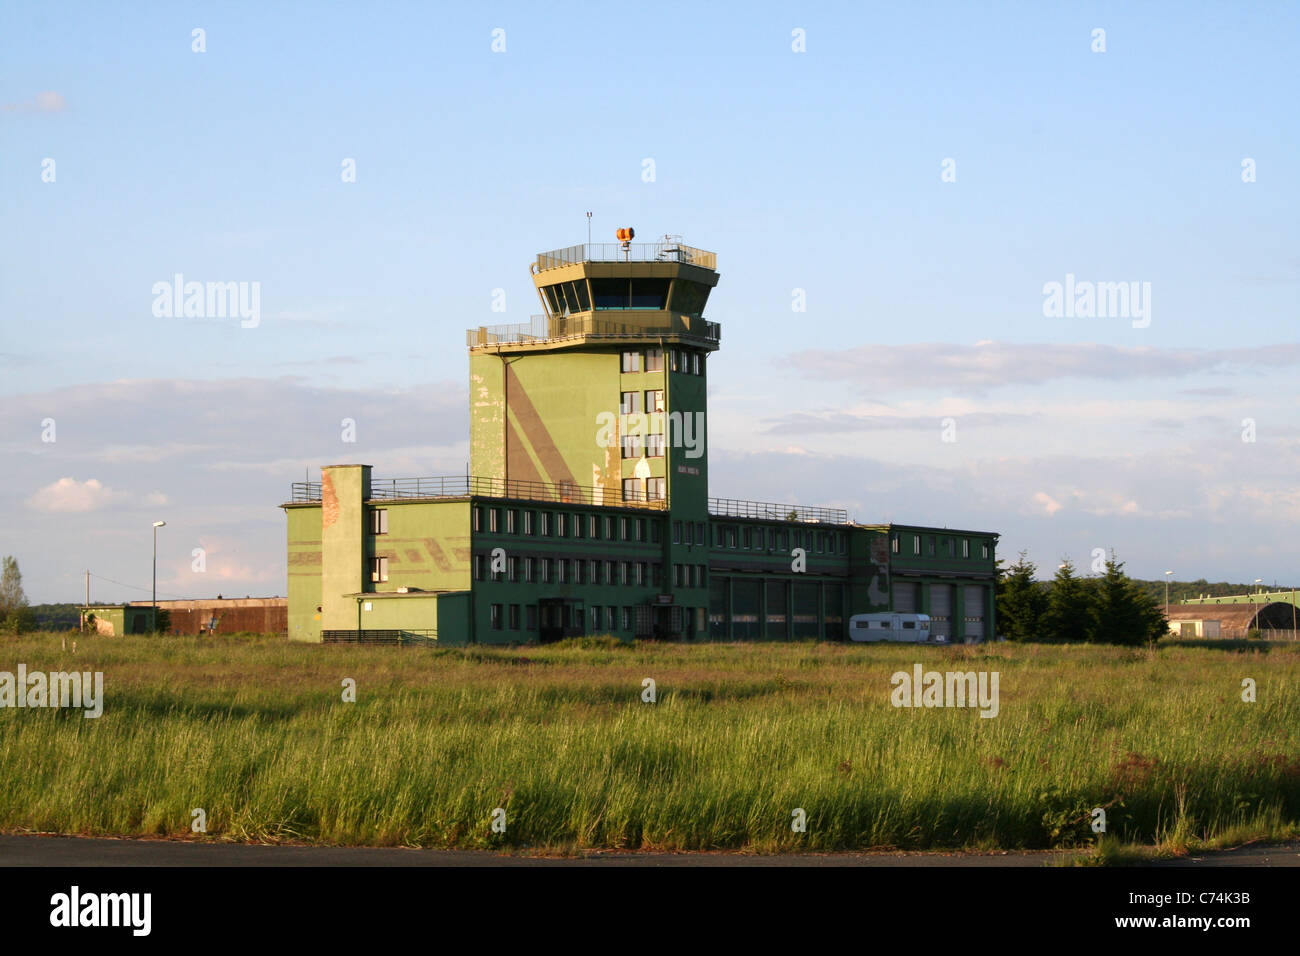 Control tower on the abandoned USAF airbase Sembach AB, Germany Stock Photo  - Alamy